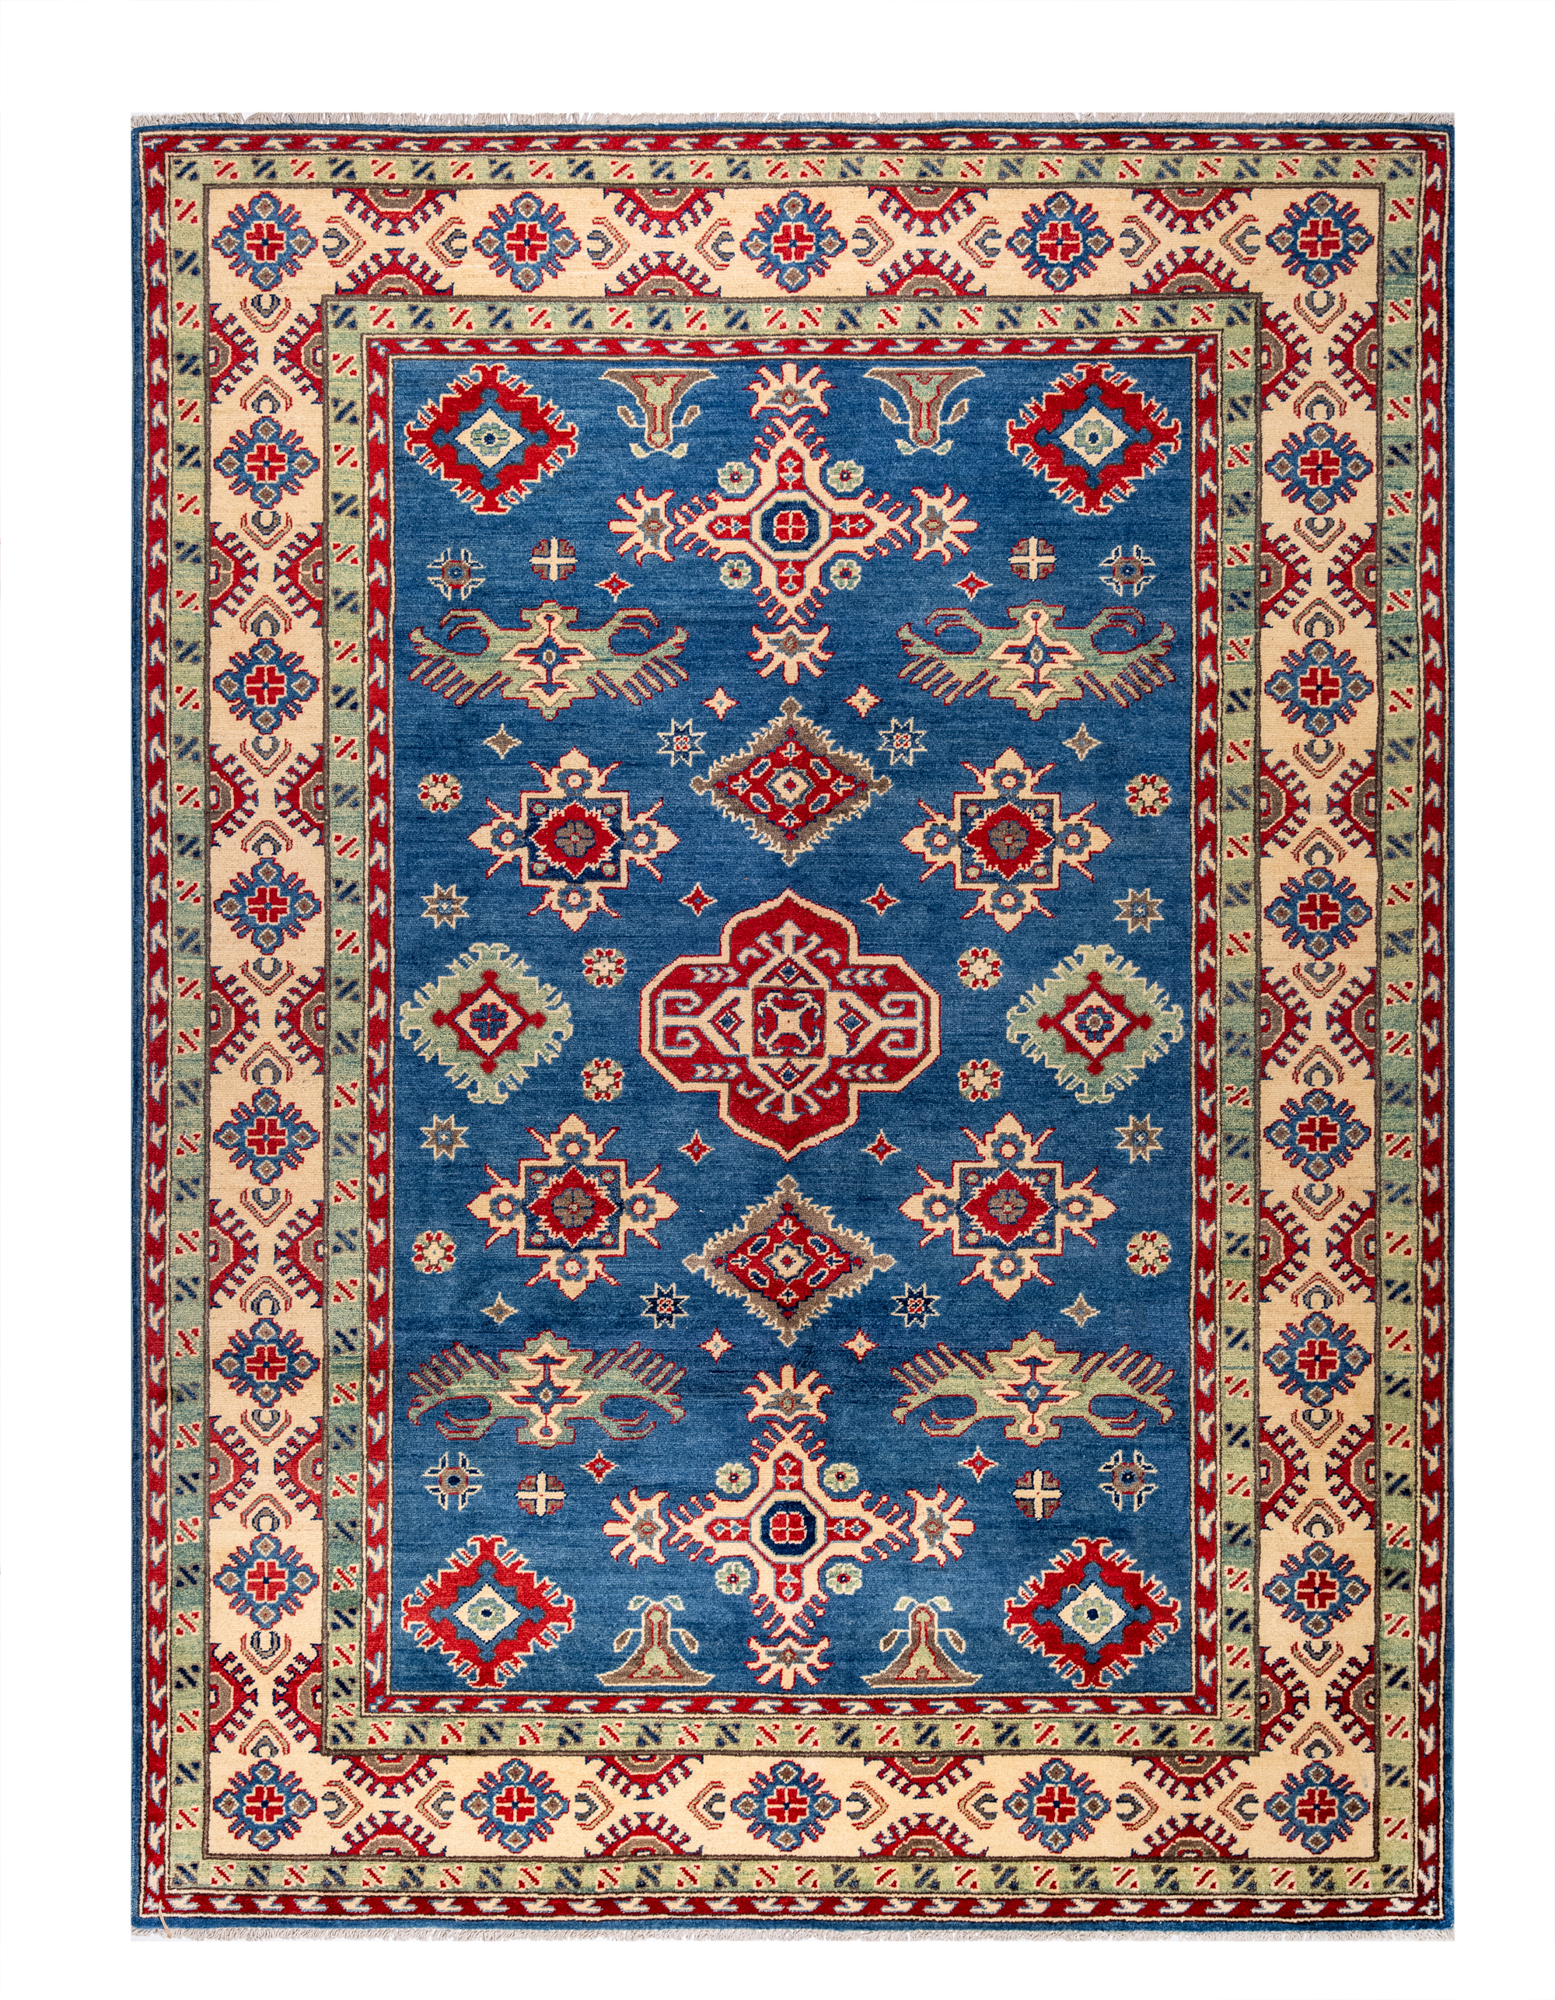 Size: 200x300cmFoundation: CottonPile: Handspun WoolShape: Rectangular Hand knotted and meticulously crafted by Afghan artisans in Afghanistan, this stunning Kazak rug is made